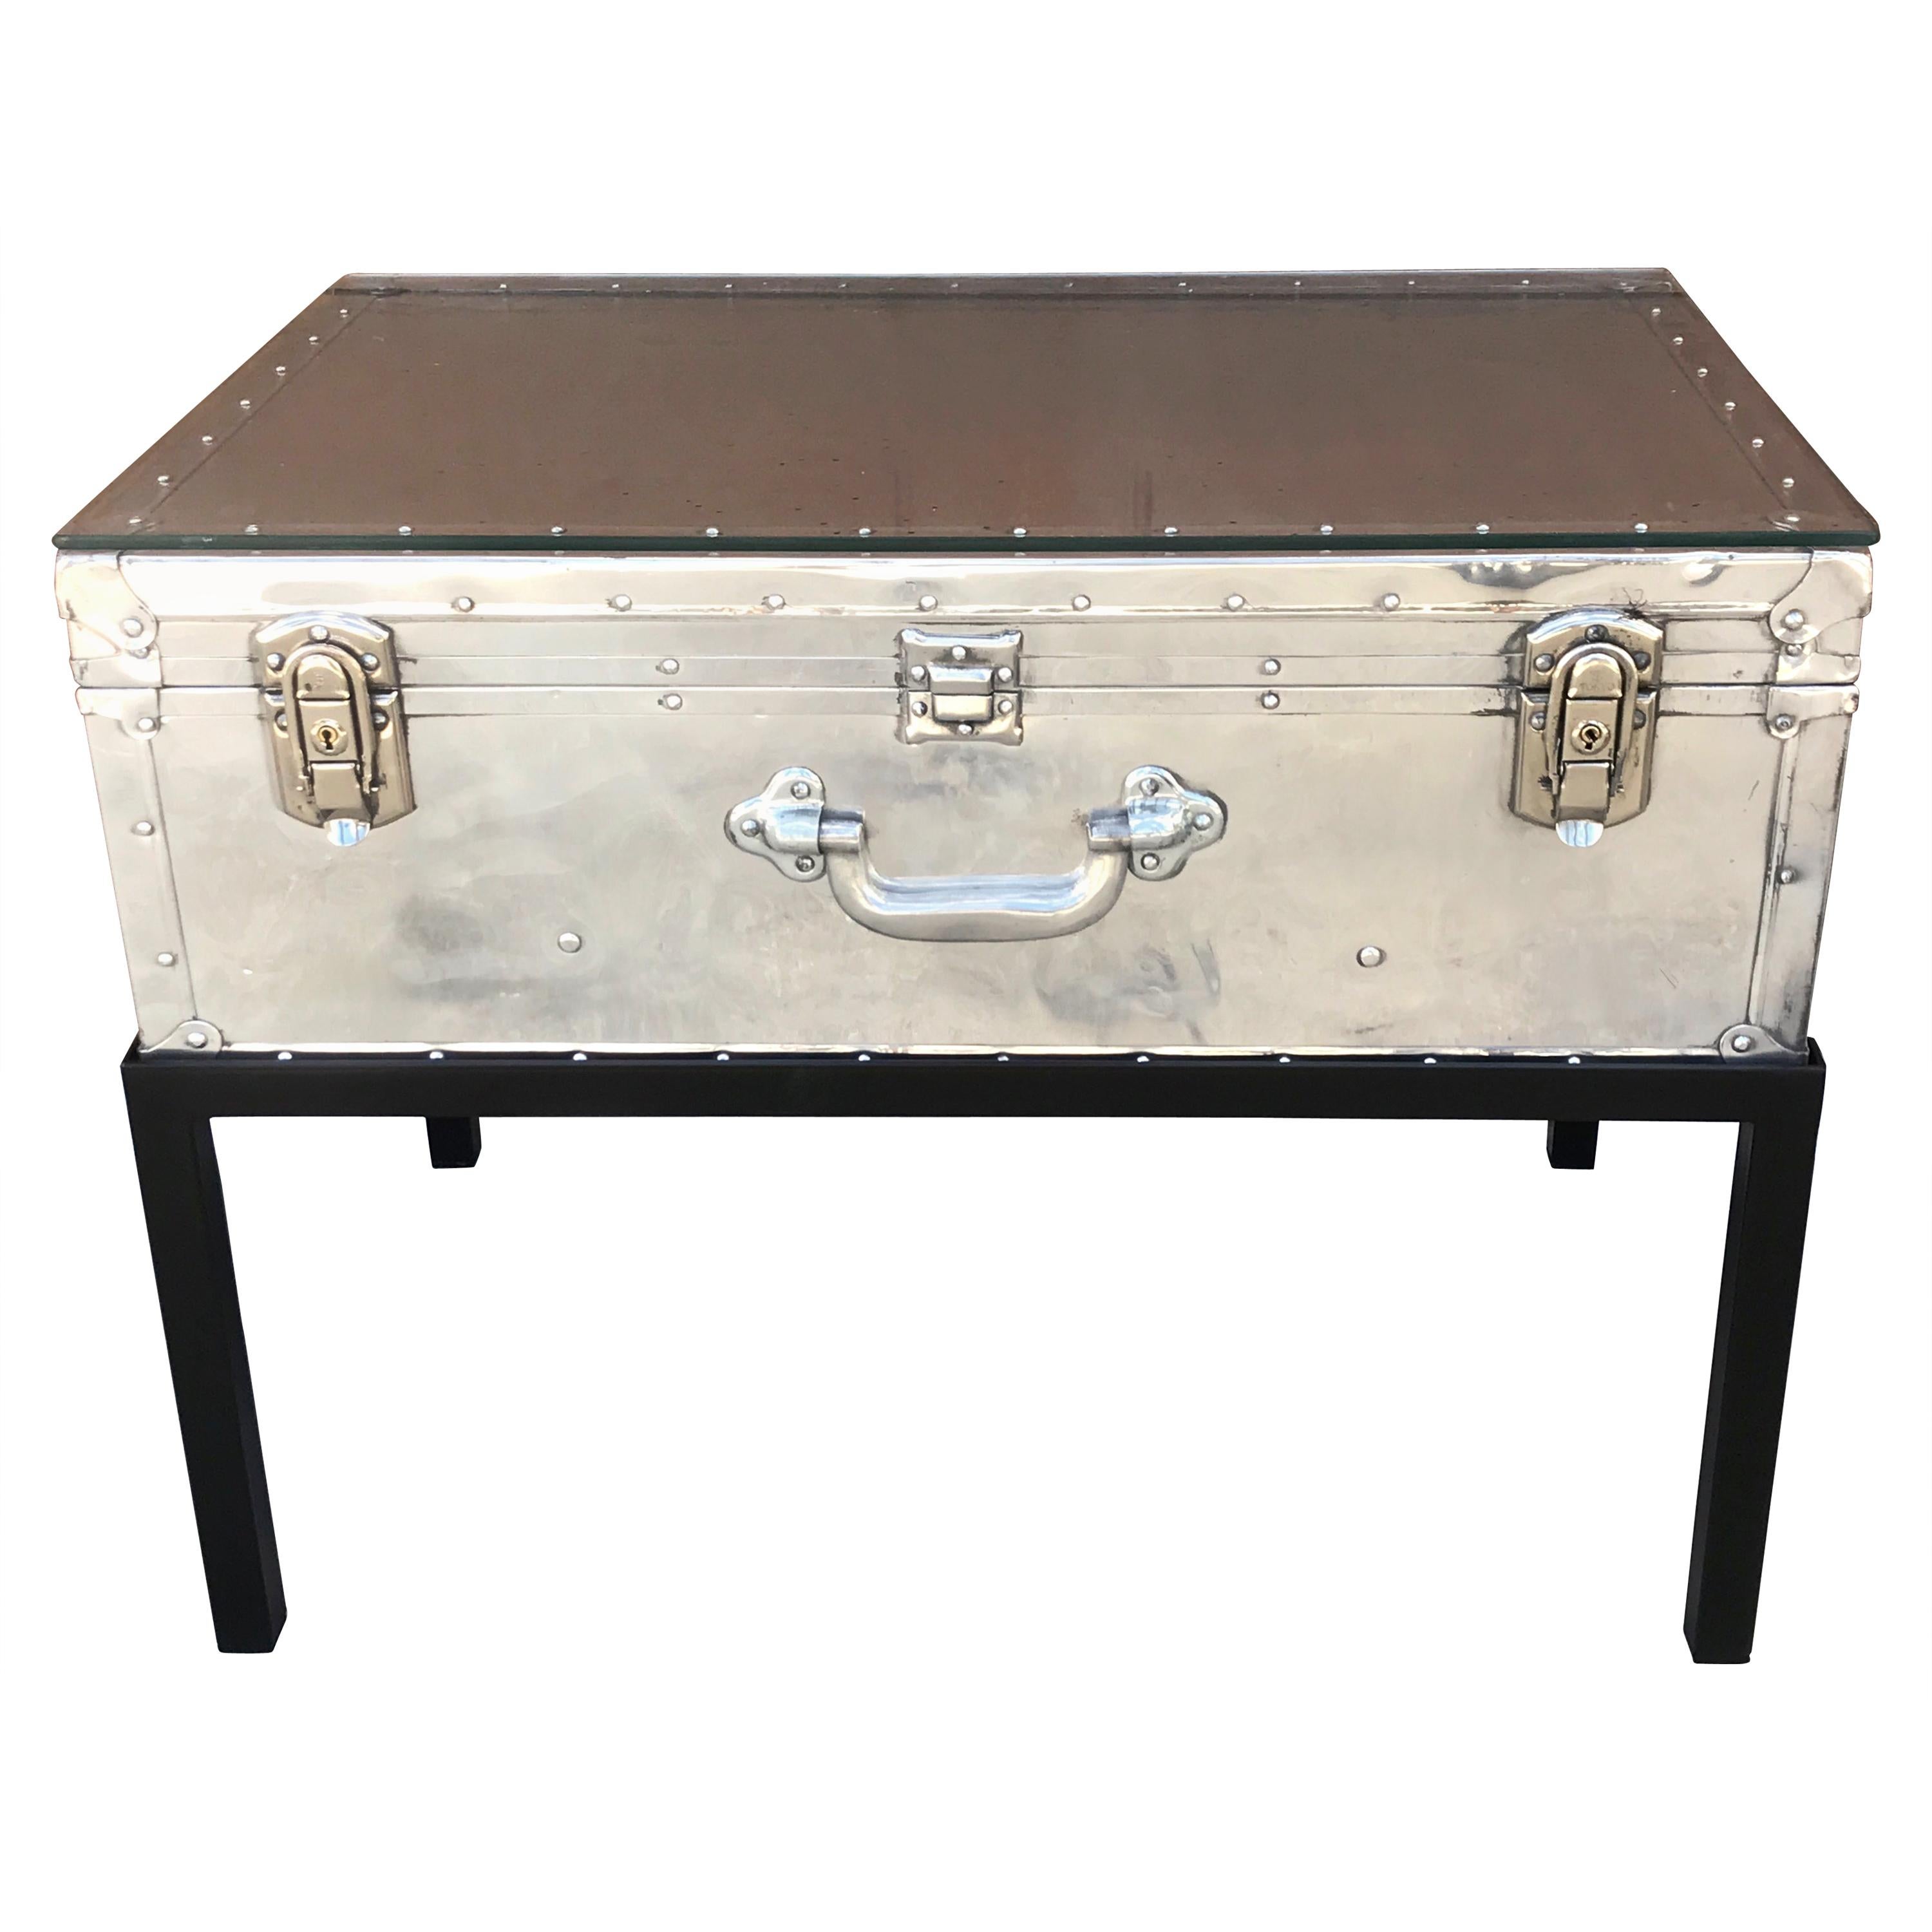 Japanese Post War Aluminum Riveted Trunk on Iron Stand with Glass Top, Restored